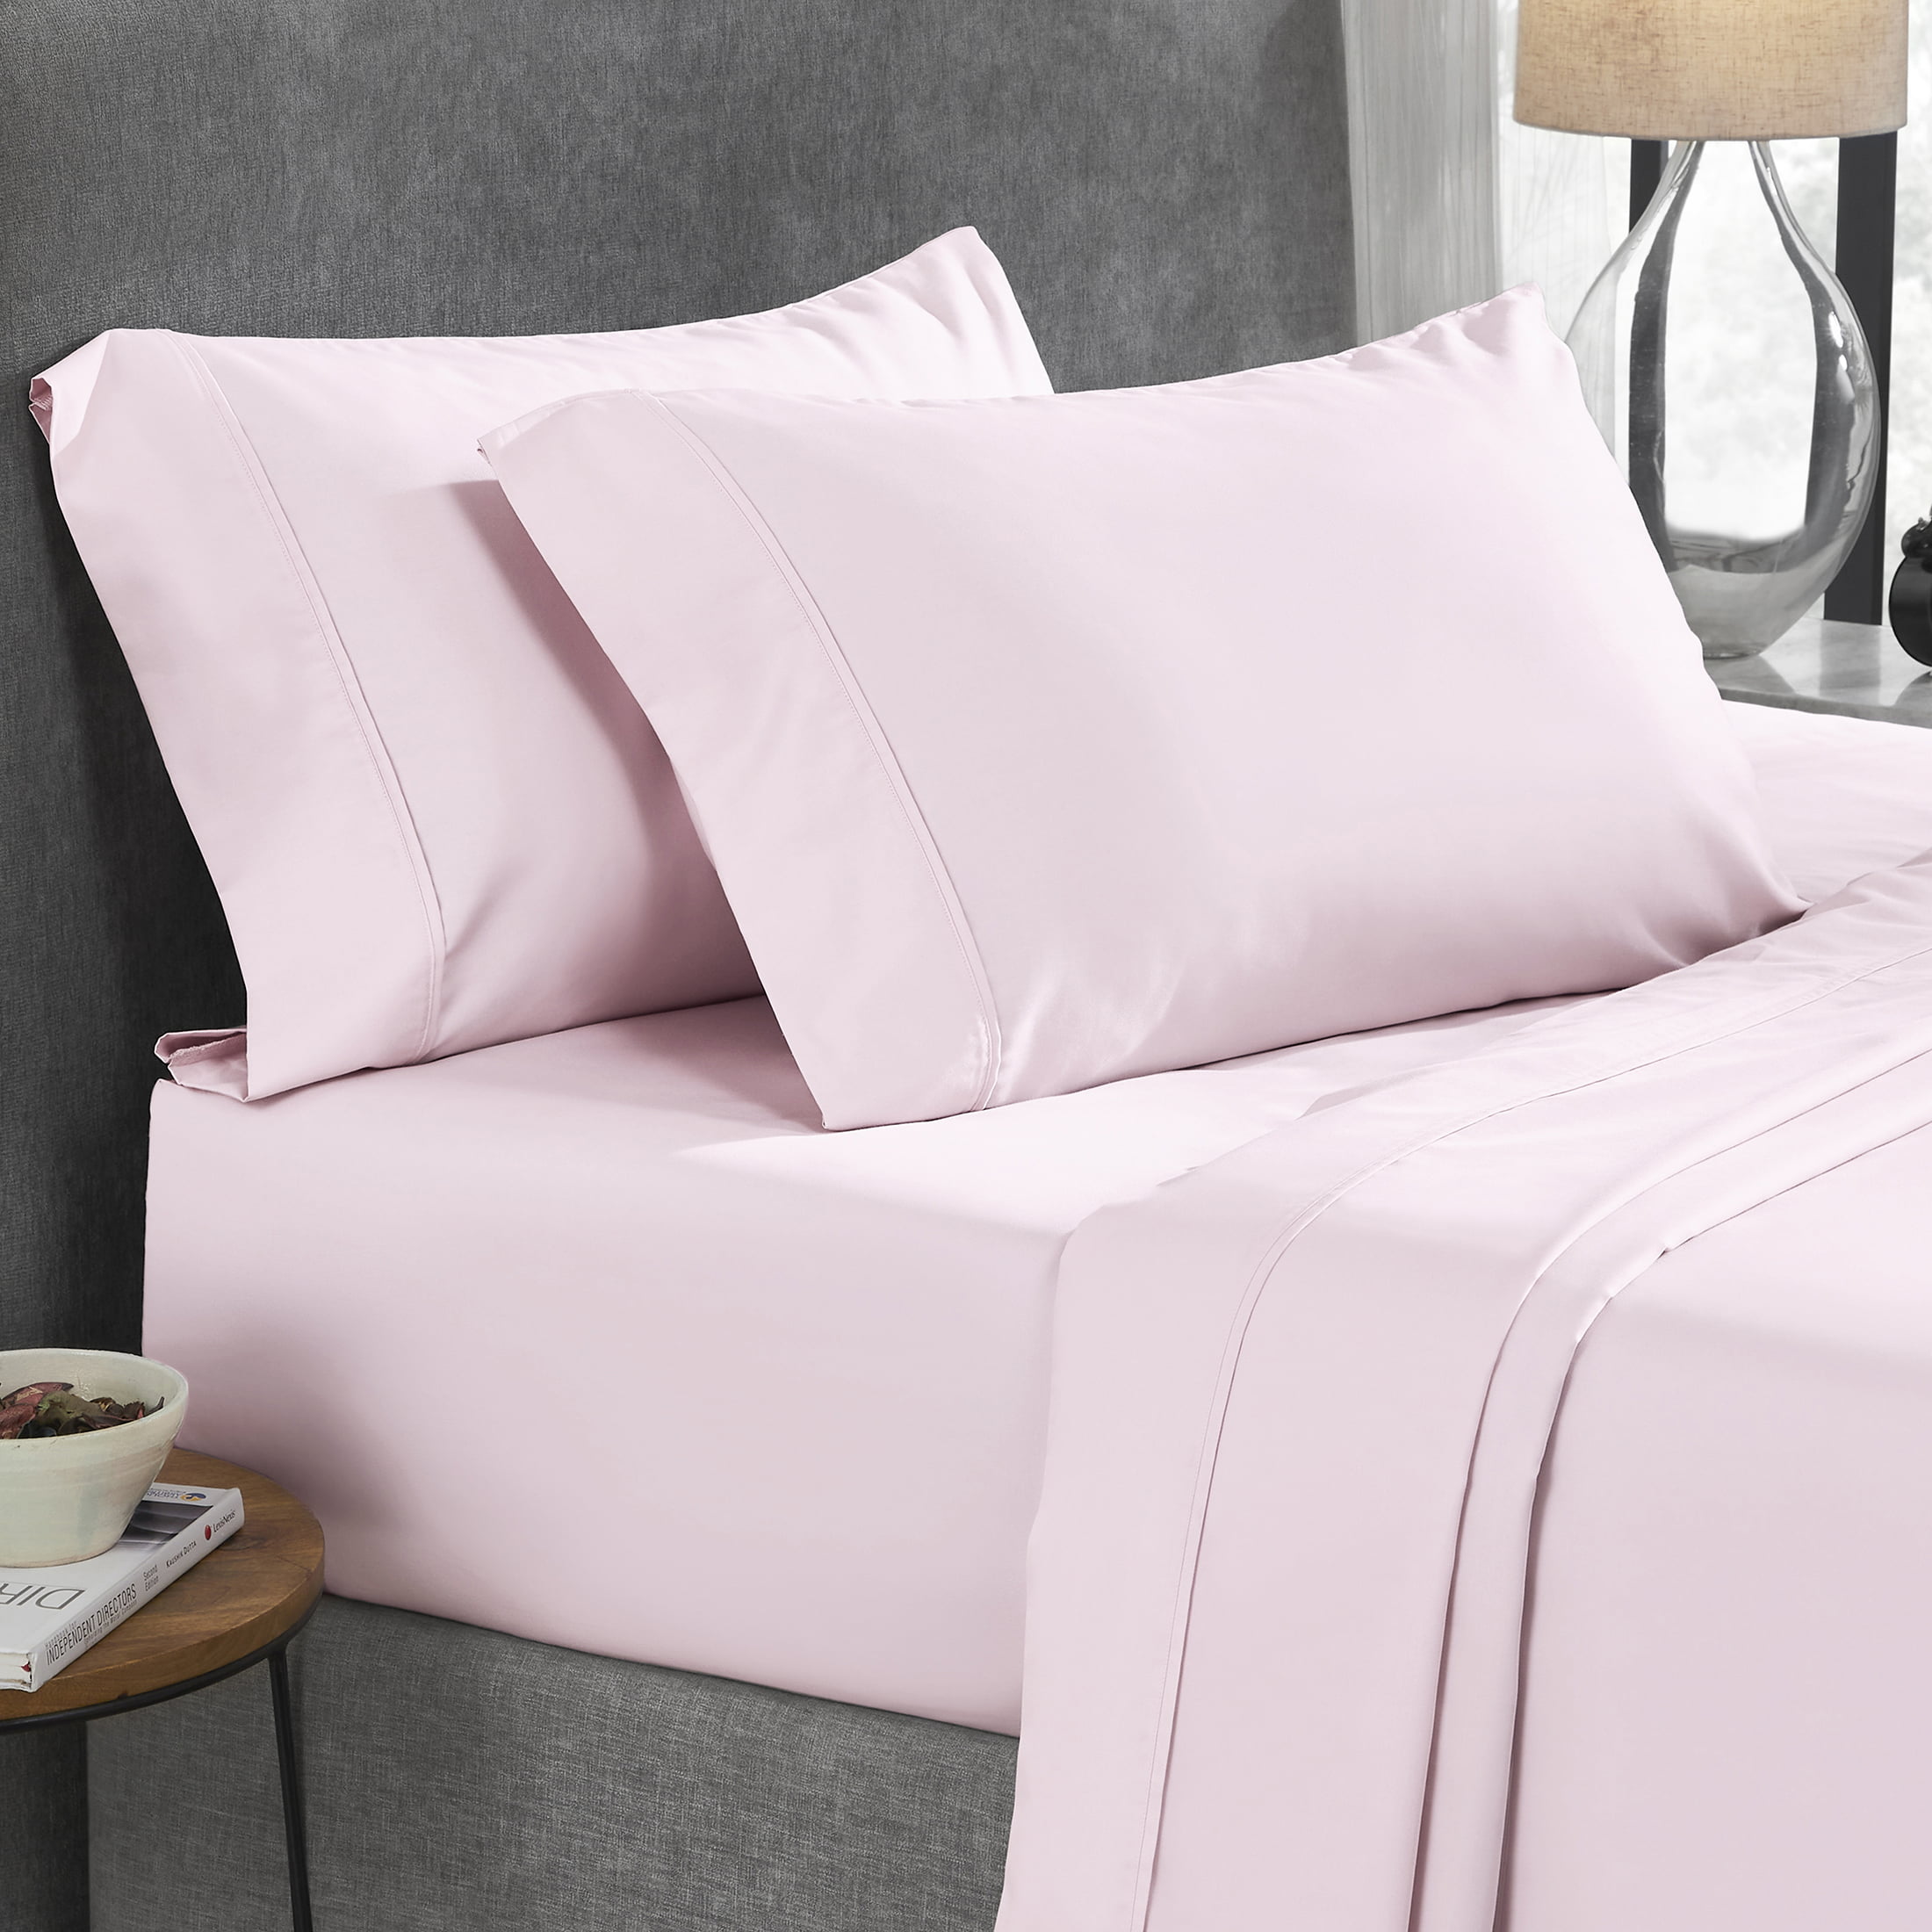 Details about   Premium 400-Thread-Count Best 100% Cotton 4 Piece Ultimate Percale Bed Sheet Set 